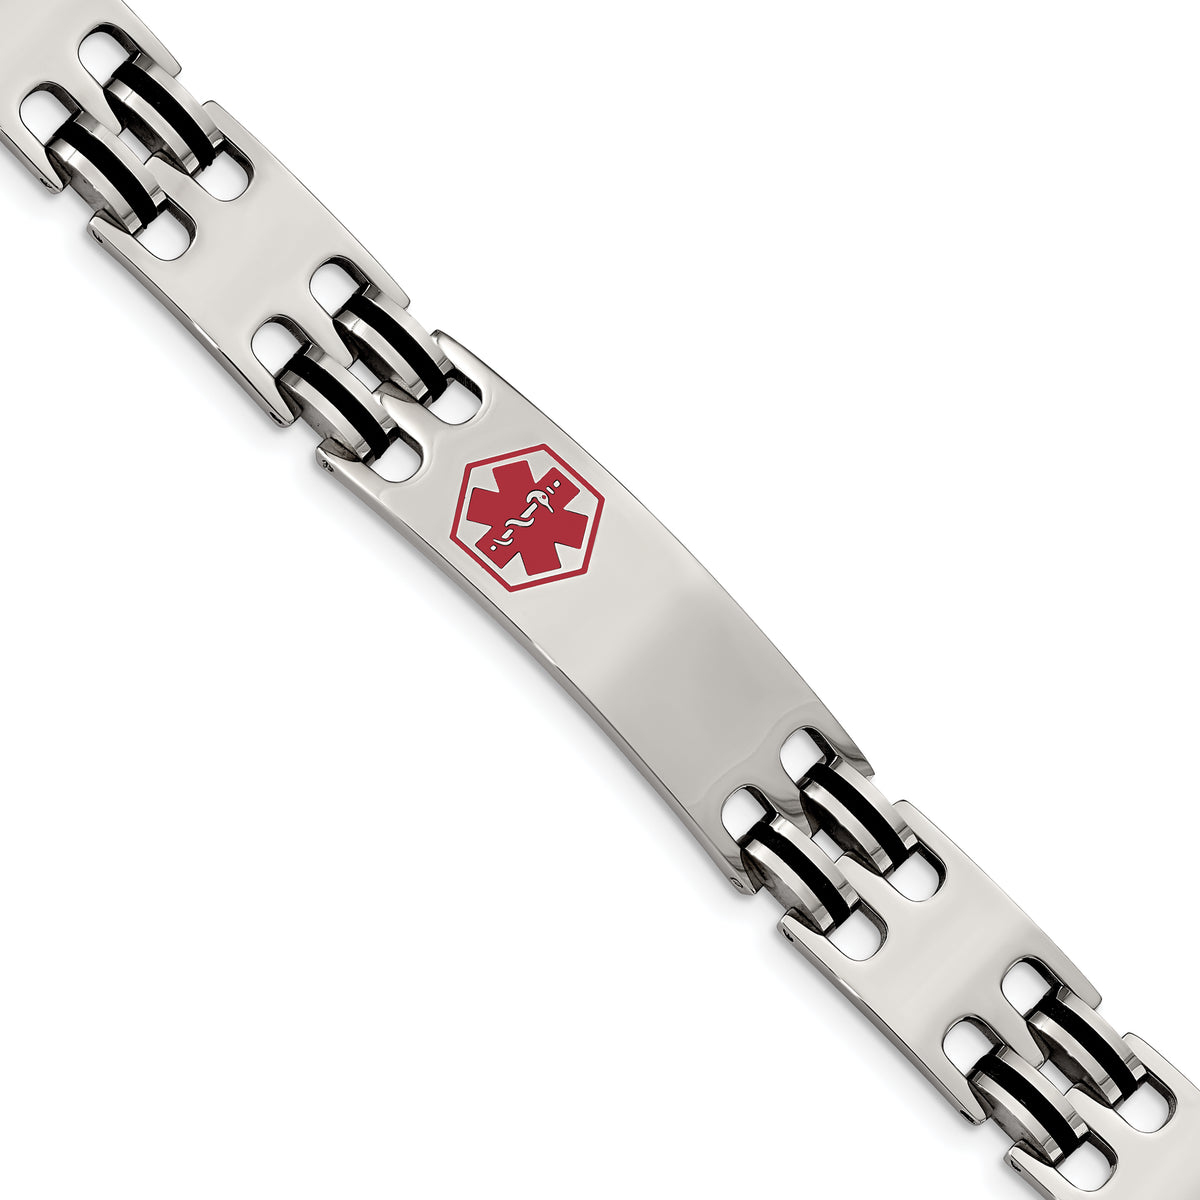 Chisel Stainless Steel Polished with Red Enamel and Black Rubber Medical ID 8.25 inch Bracelet